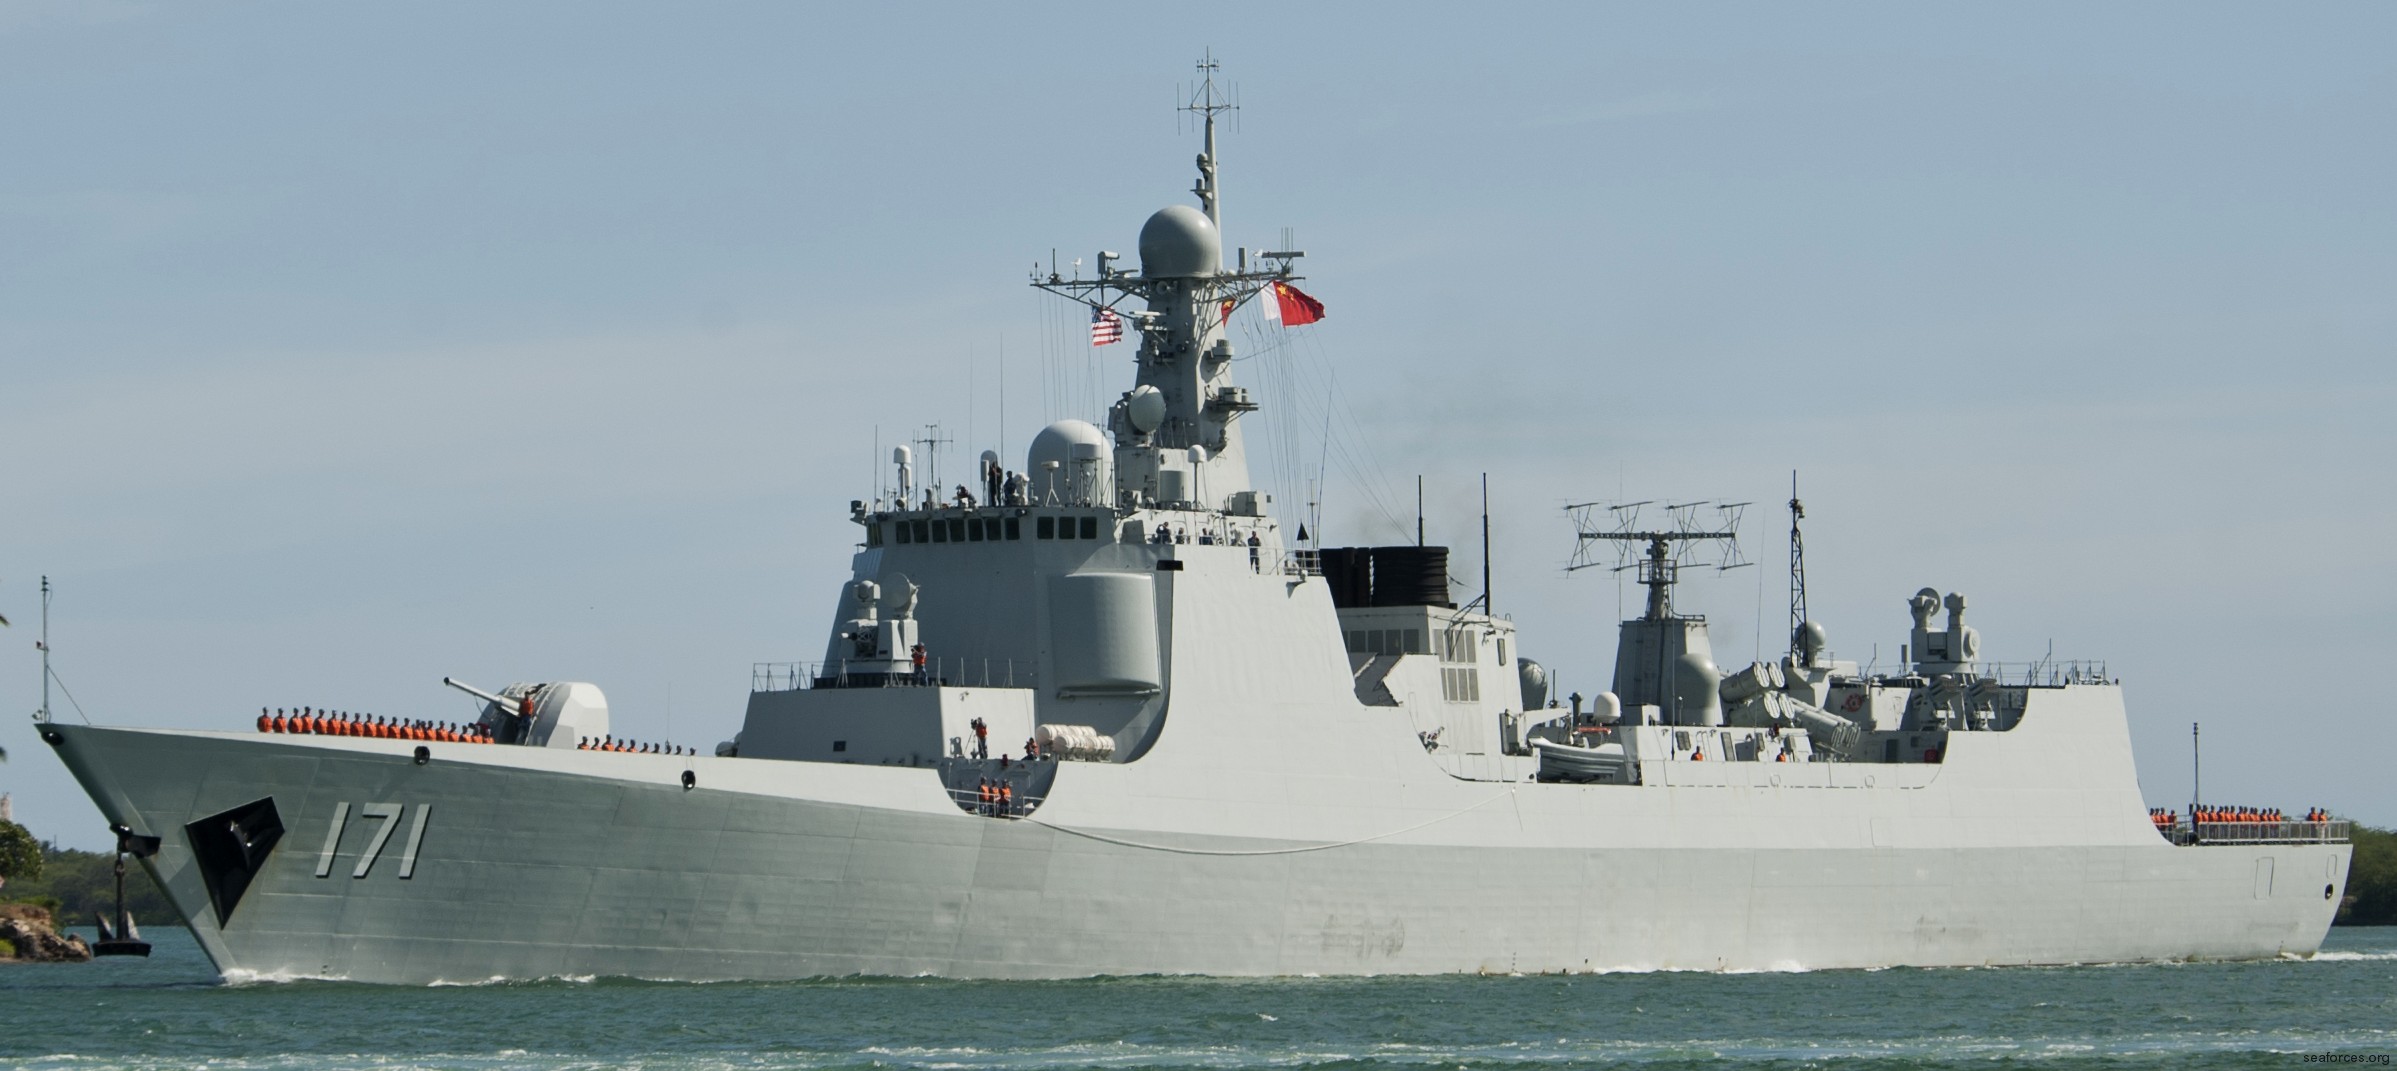 ddg-171 plans haikou type 052c class guided missile destroyer china people's liberation army navy 04